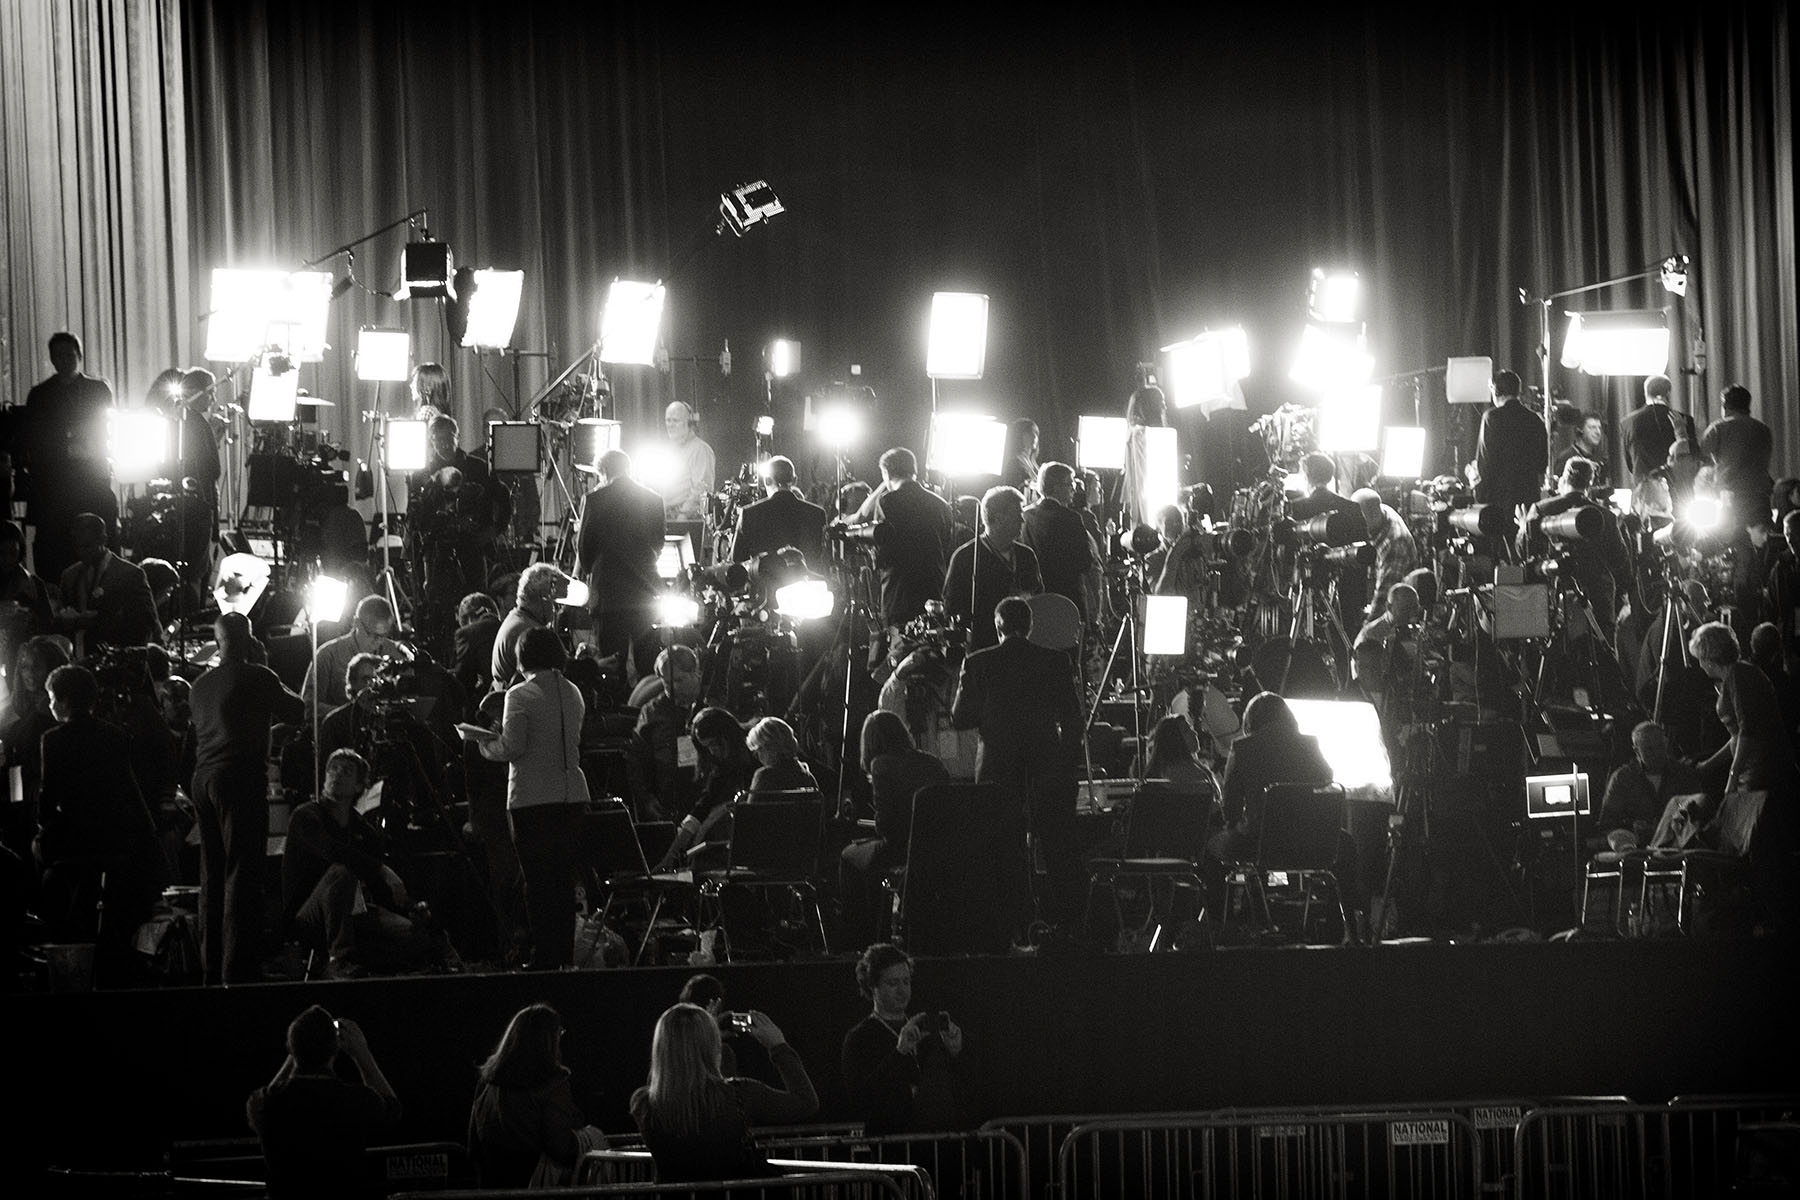 A large media group awaits U.S. President Barack Obama before his election night rally in Chicago.